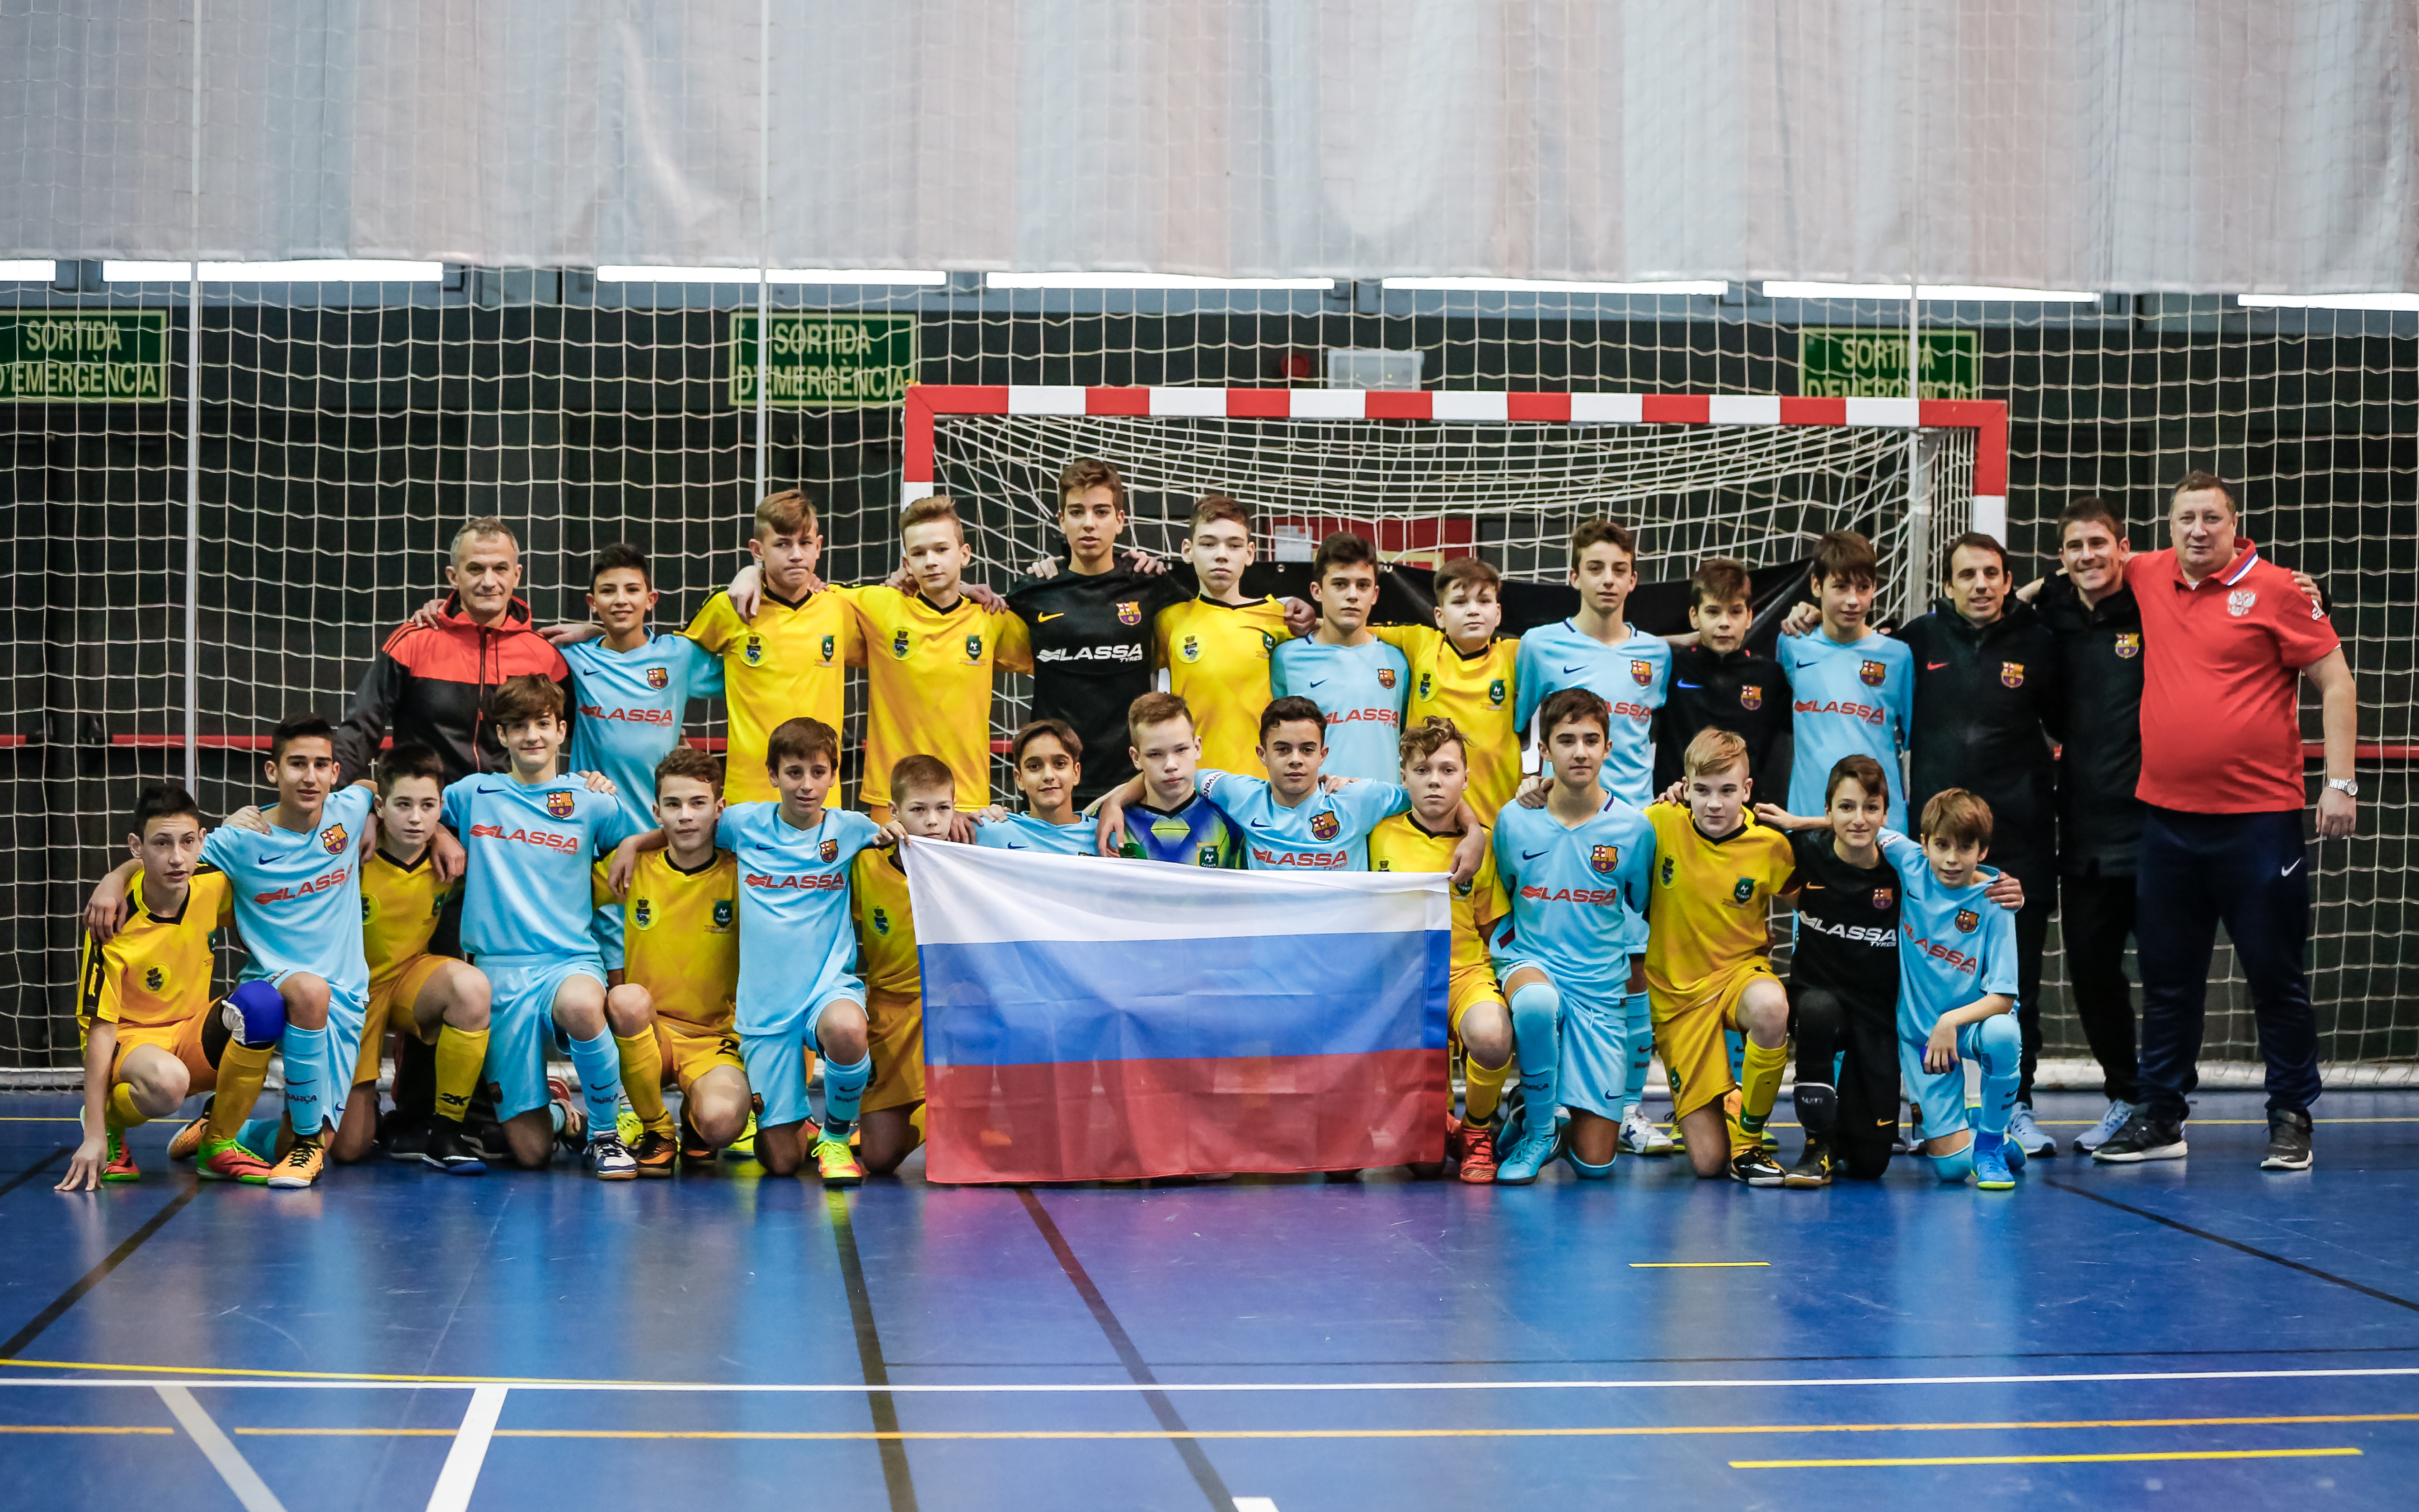 Dina Moscow & FC Barcelona take a photo together at World Futsal Cup